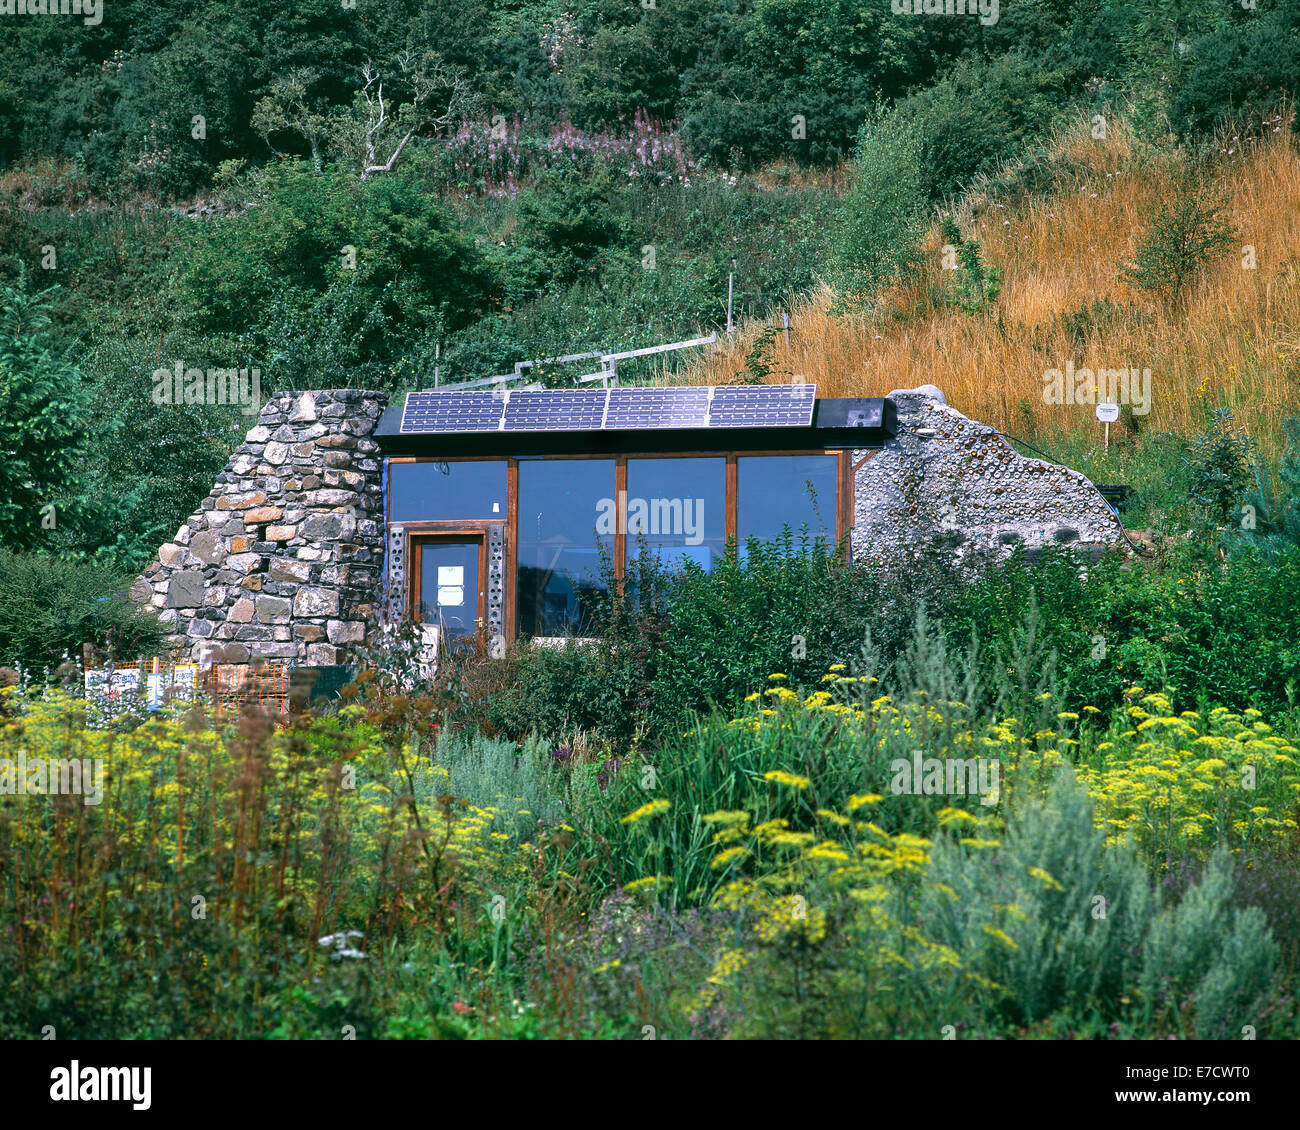 The Fife Earthship nearing completion in 2003, at the Craigencalt Ecology Centre, Kinghorn, Fife, Scotland. Stock Photo